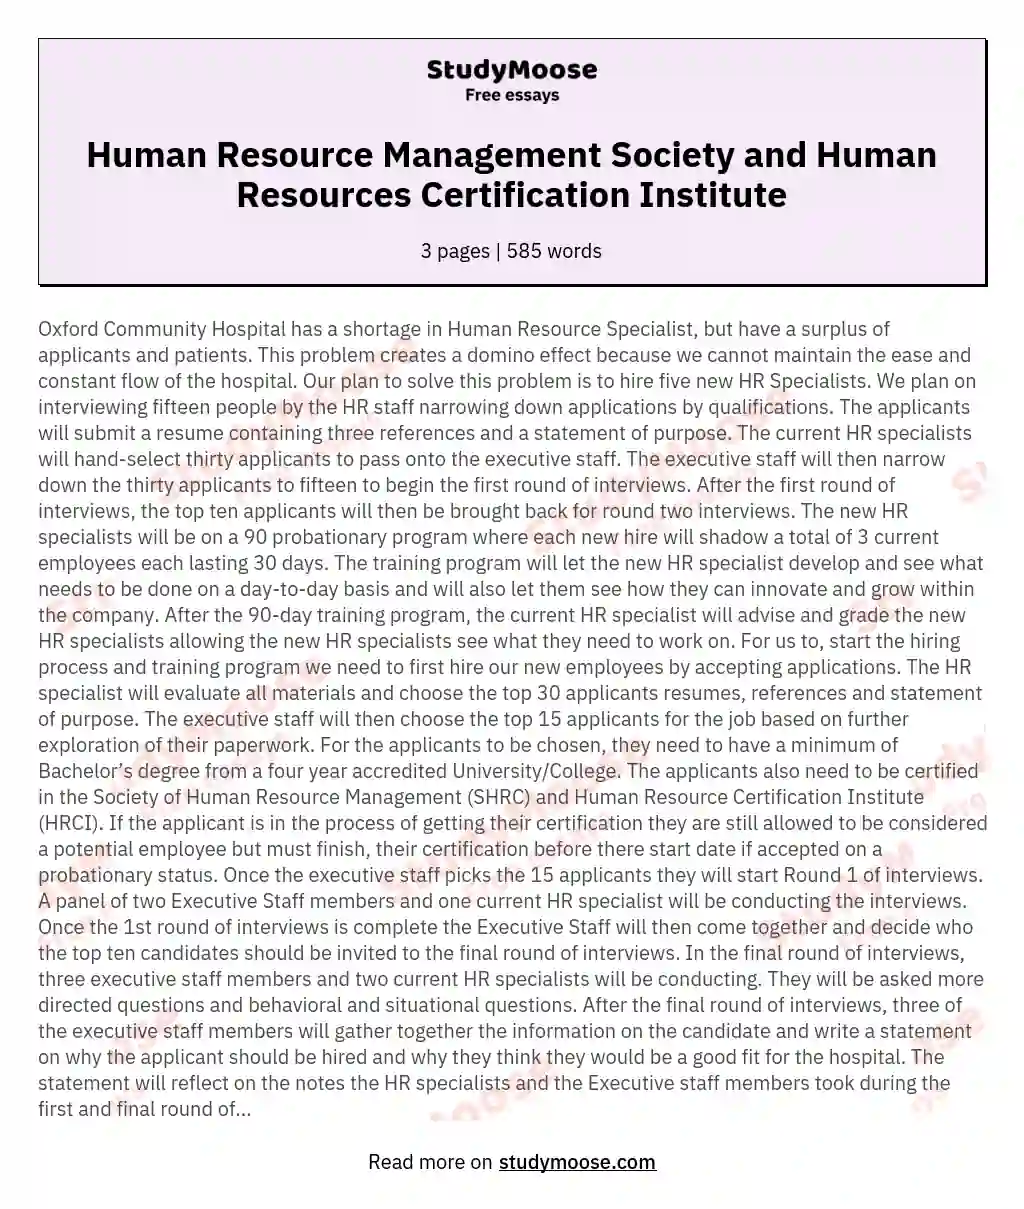 Human Resource Management Society and Human Resources Certification Institute essay